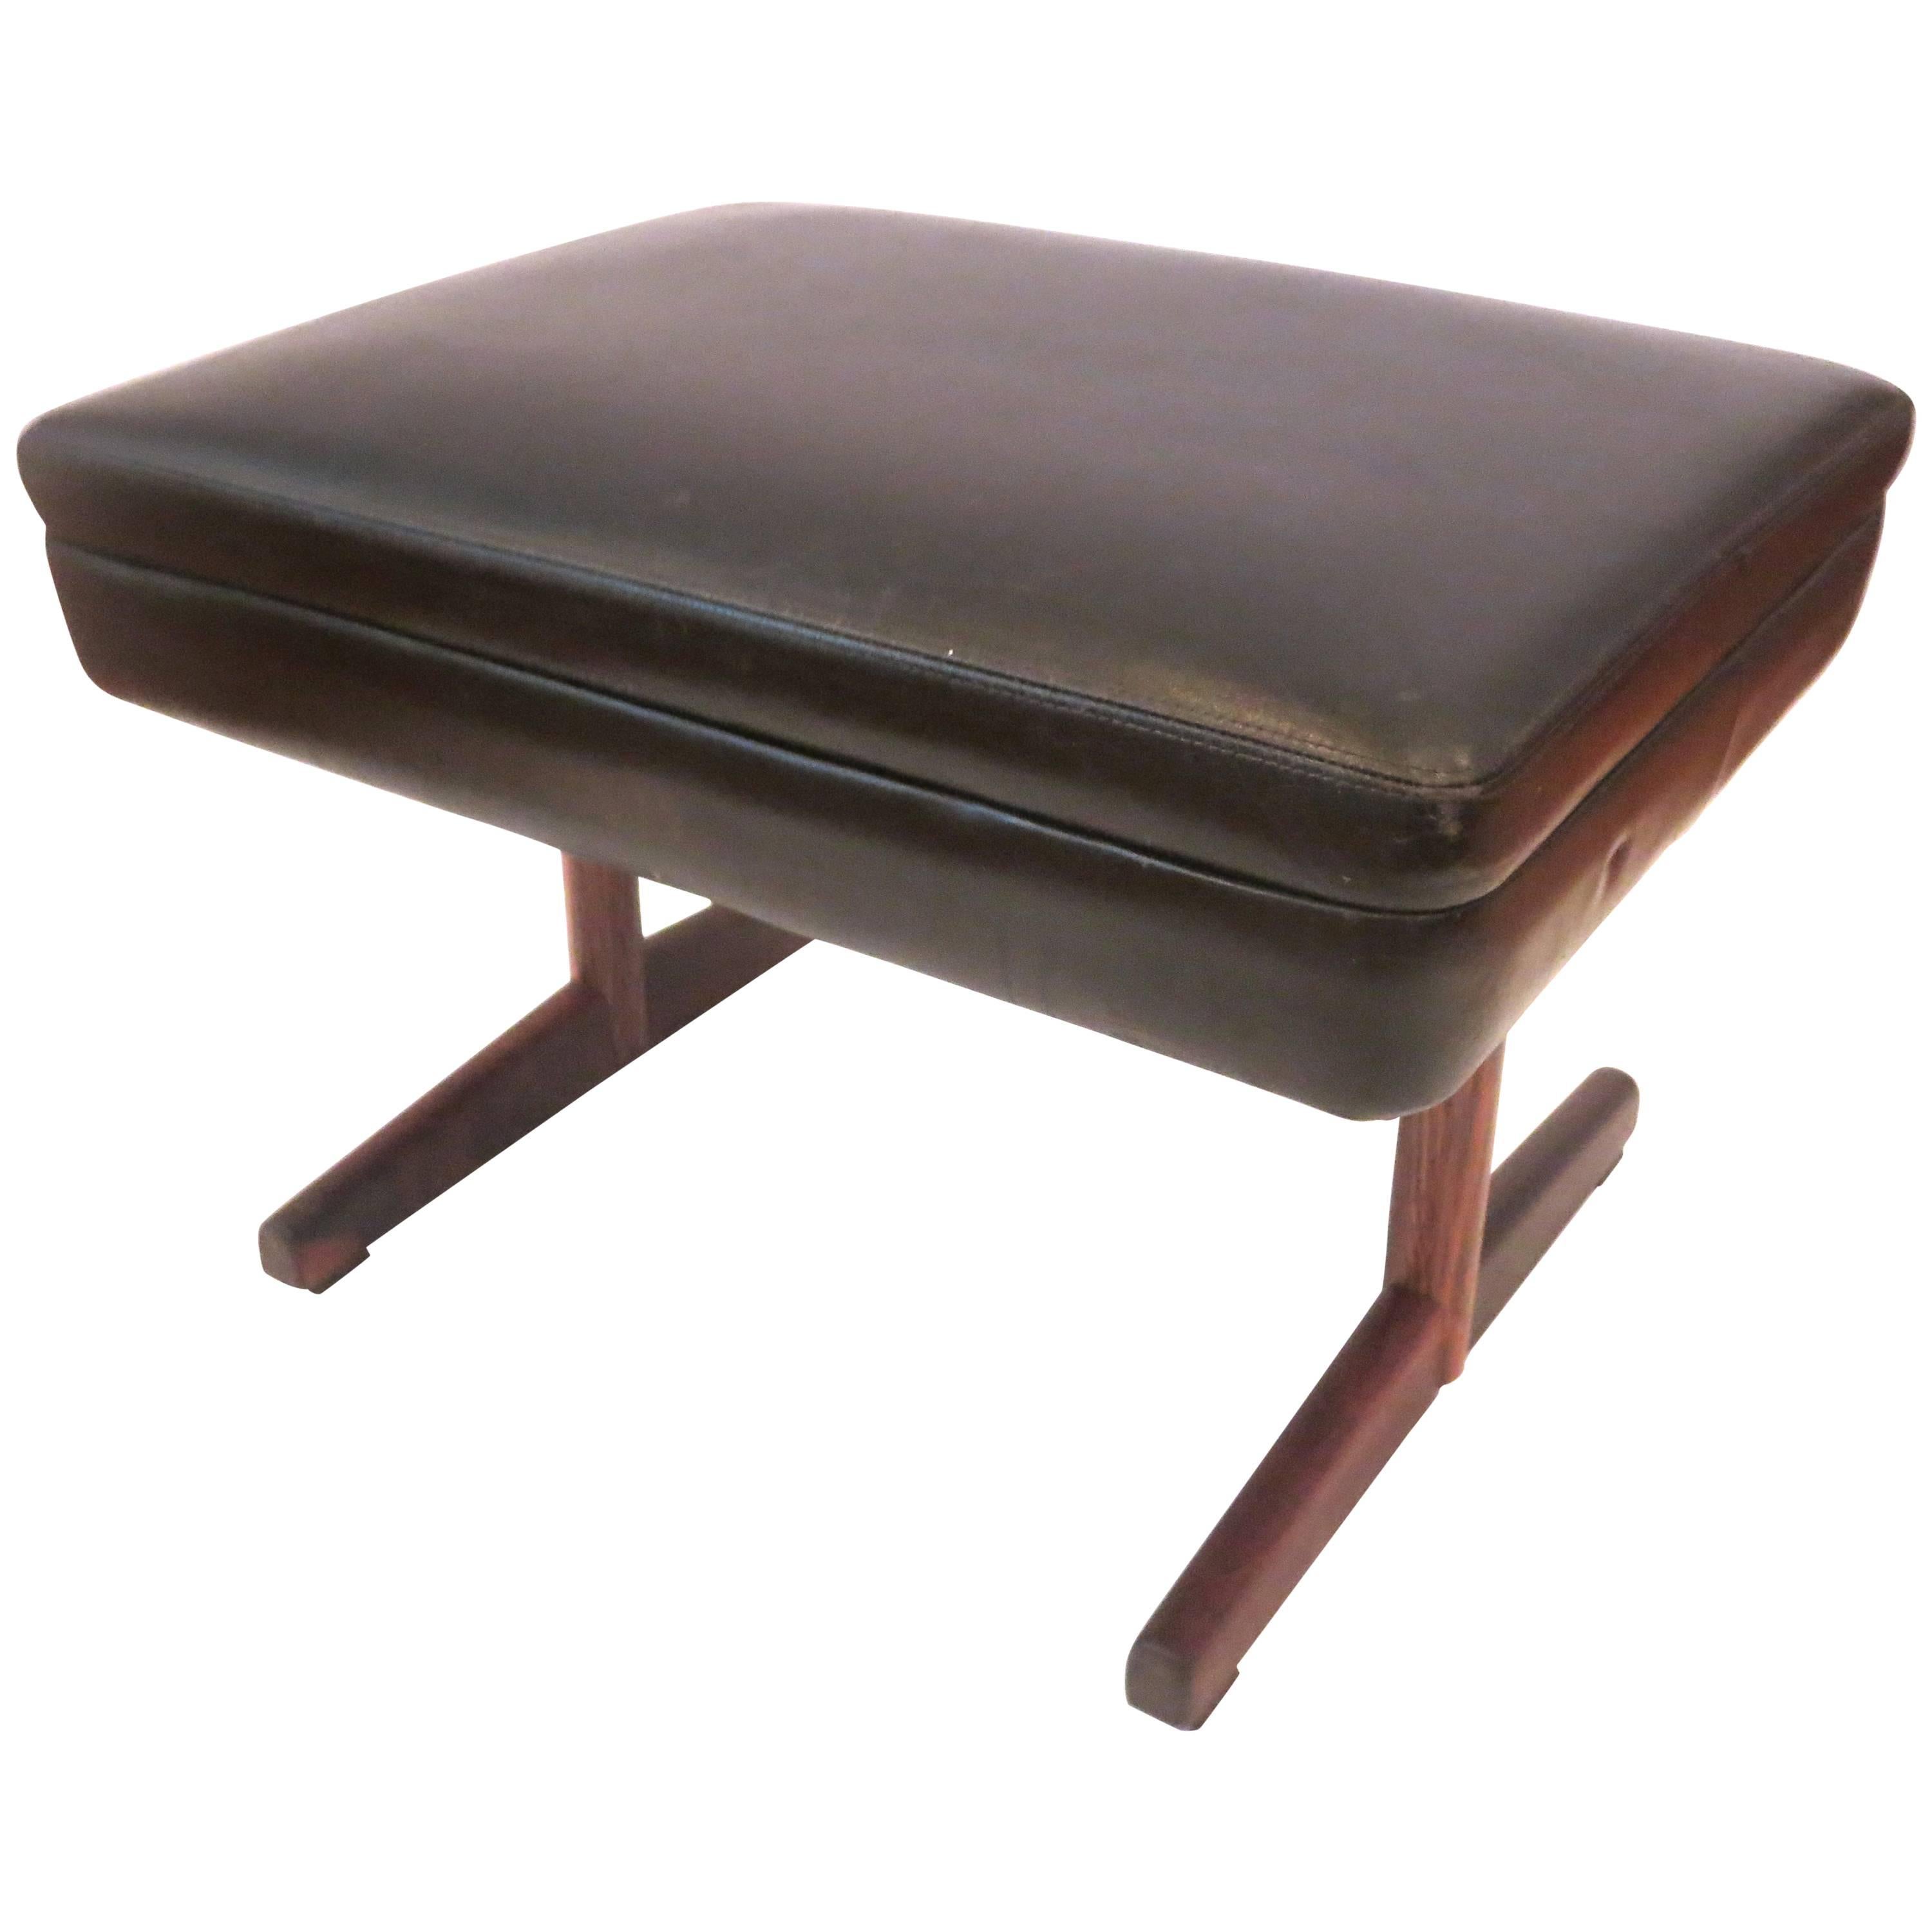 Danish Modern Rosewood and Leather Ottoman or Stool